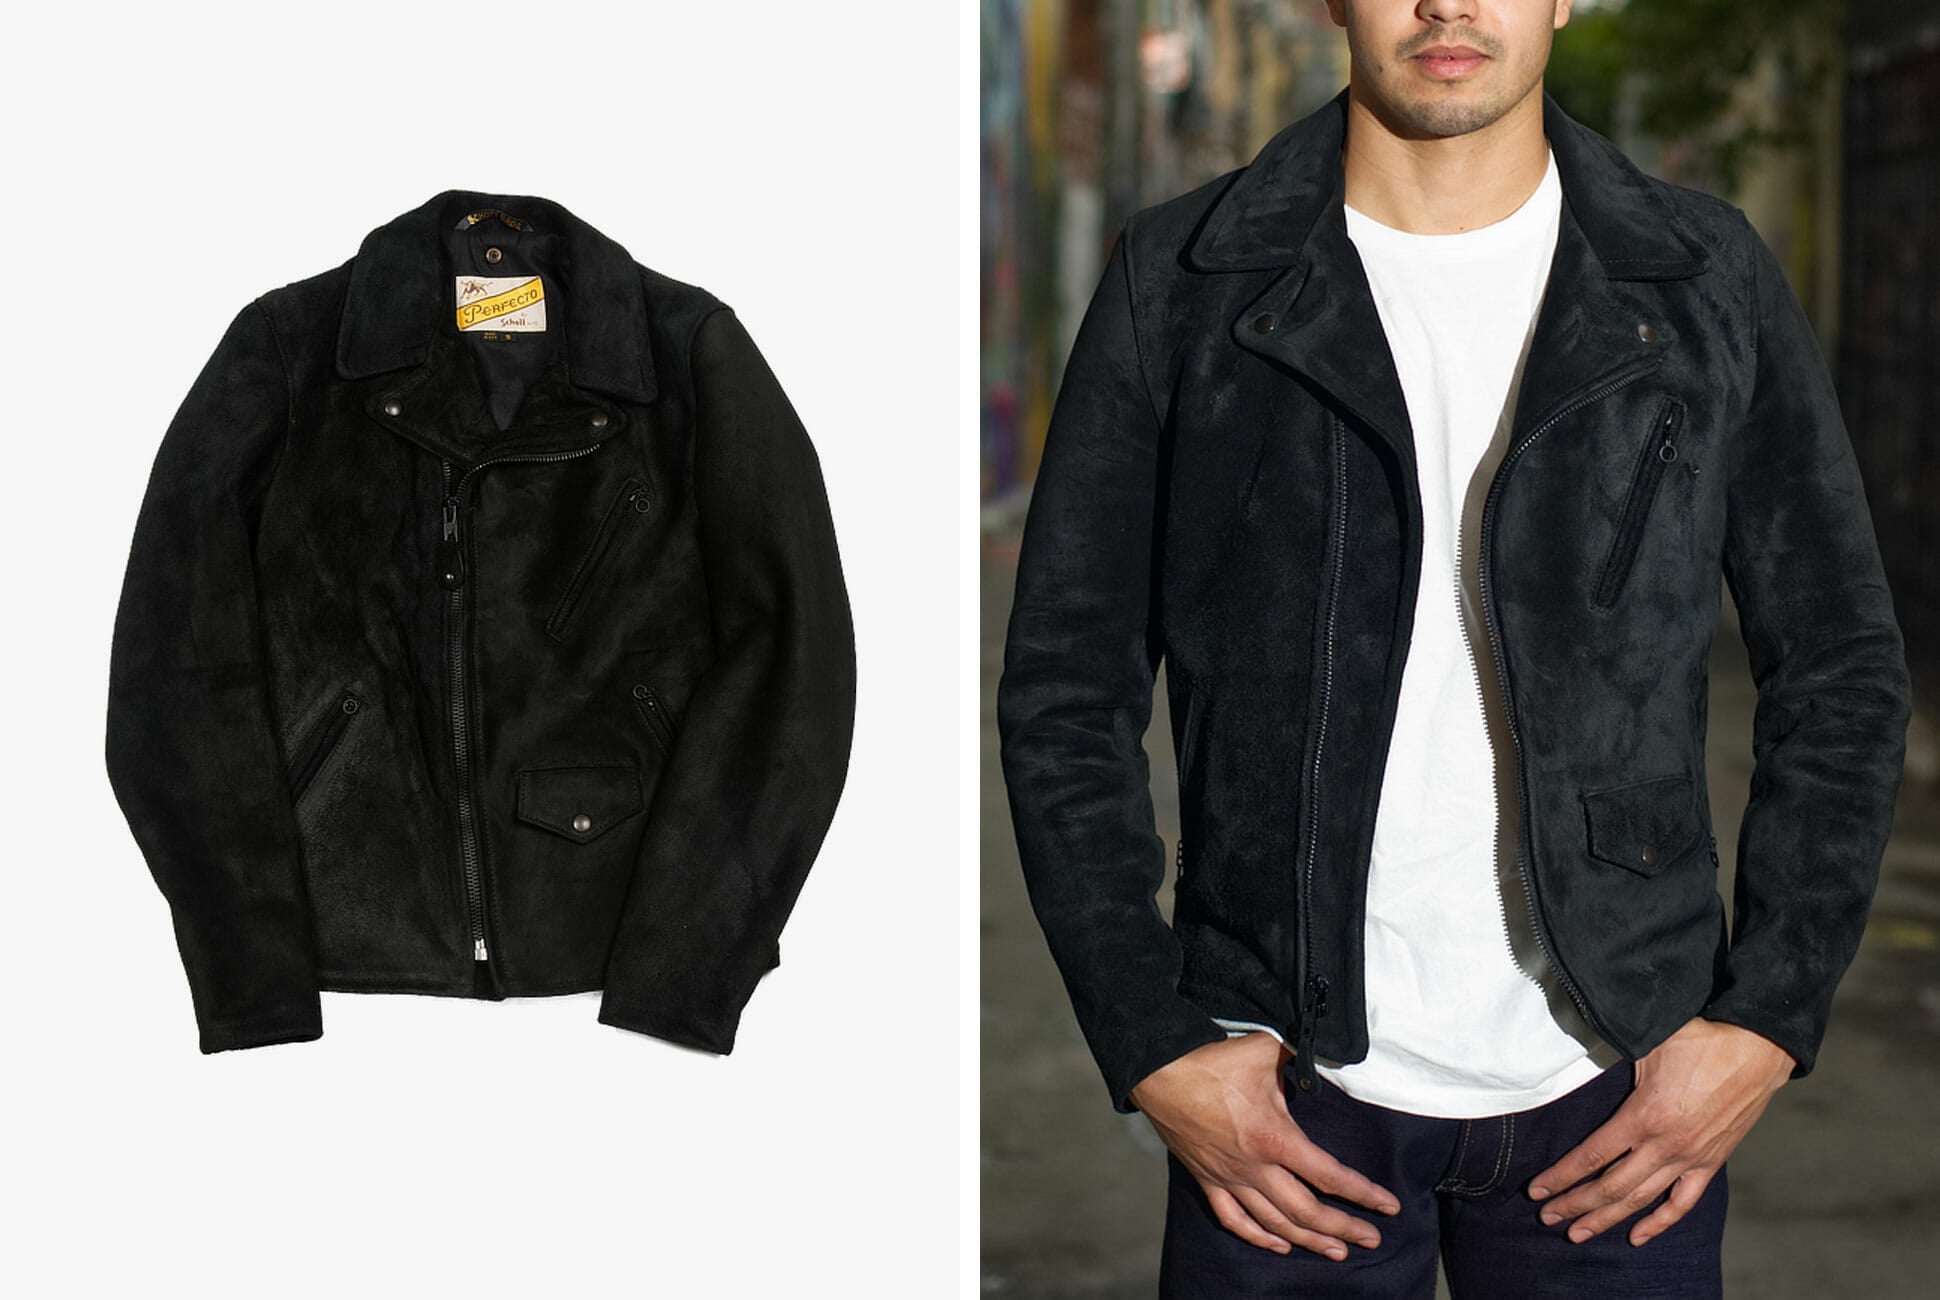 GEAR PATROL | 3SIXTEEN X SCHOTT Collaboration  | This Limited-Edition Jacket Features a Unique Leather from Horween